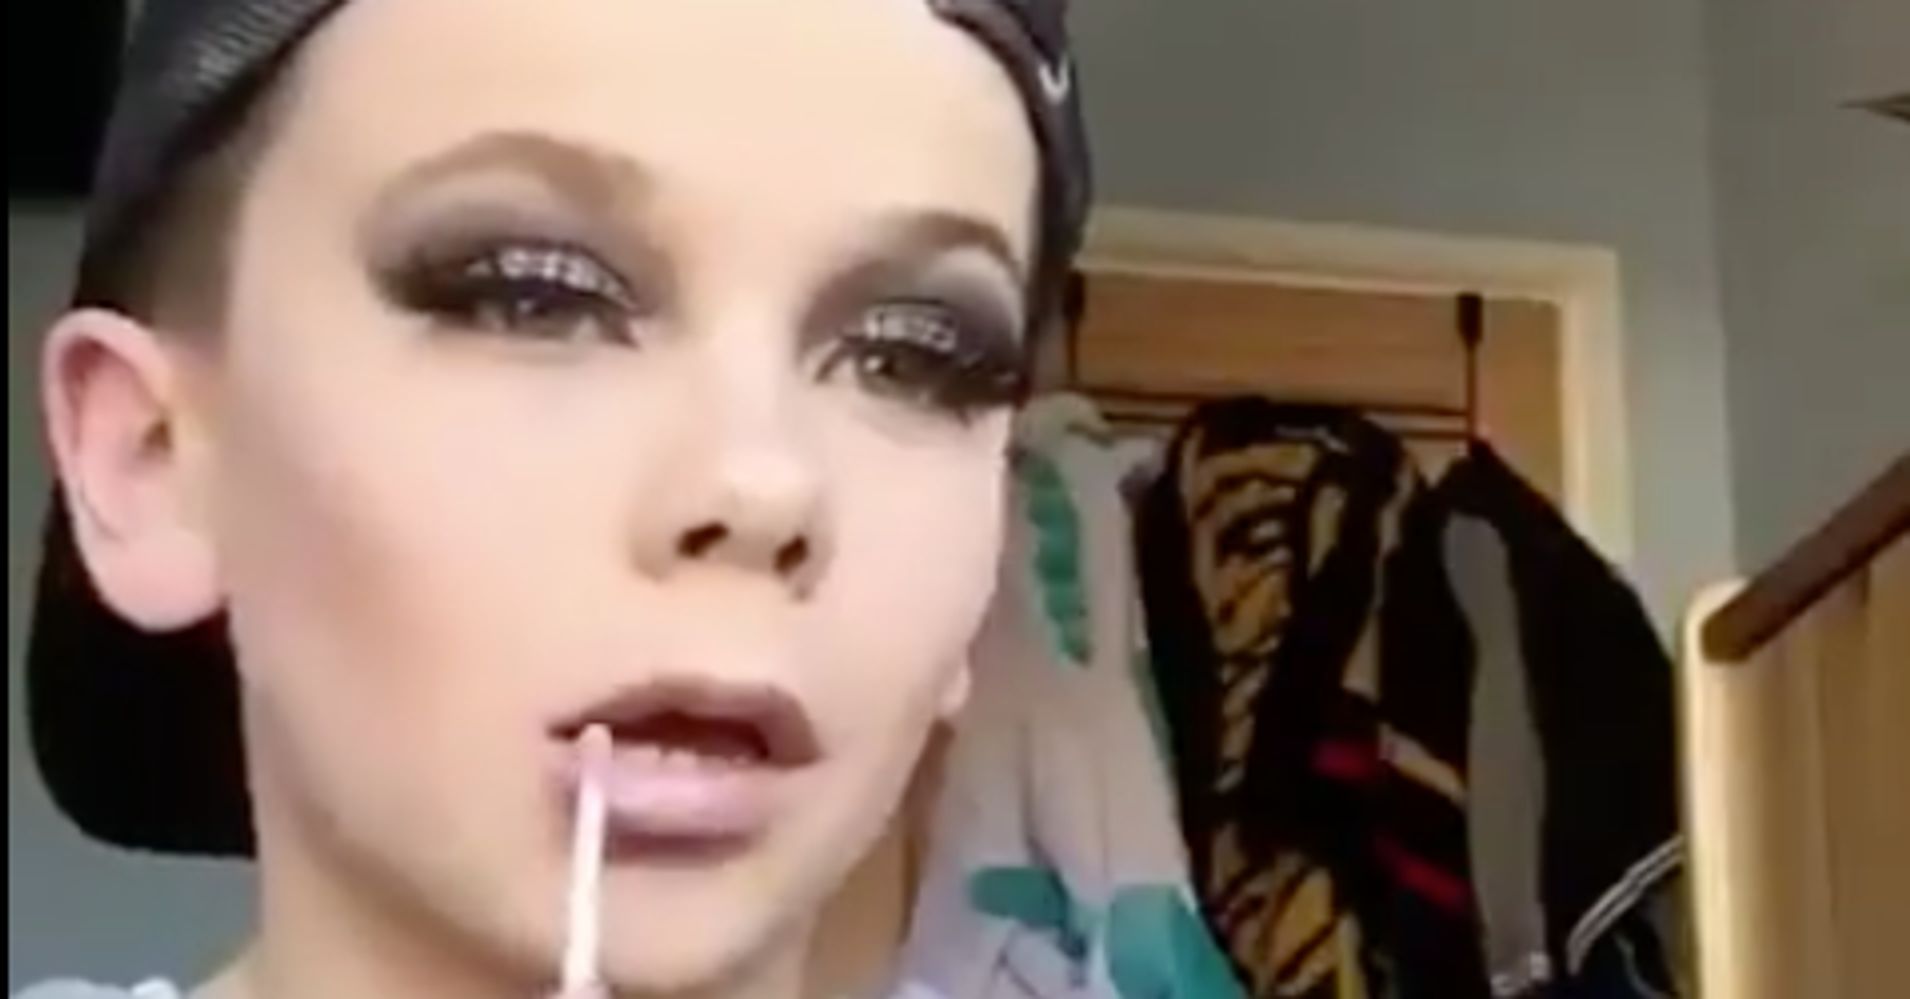 Facebook Users Have Awesome Responses To Little Boys Makeup